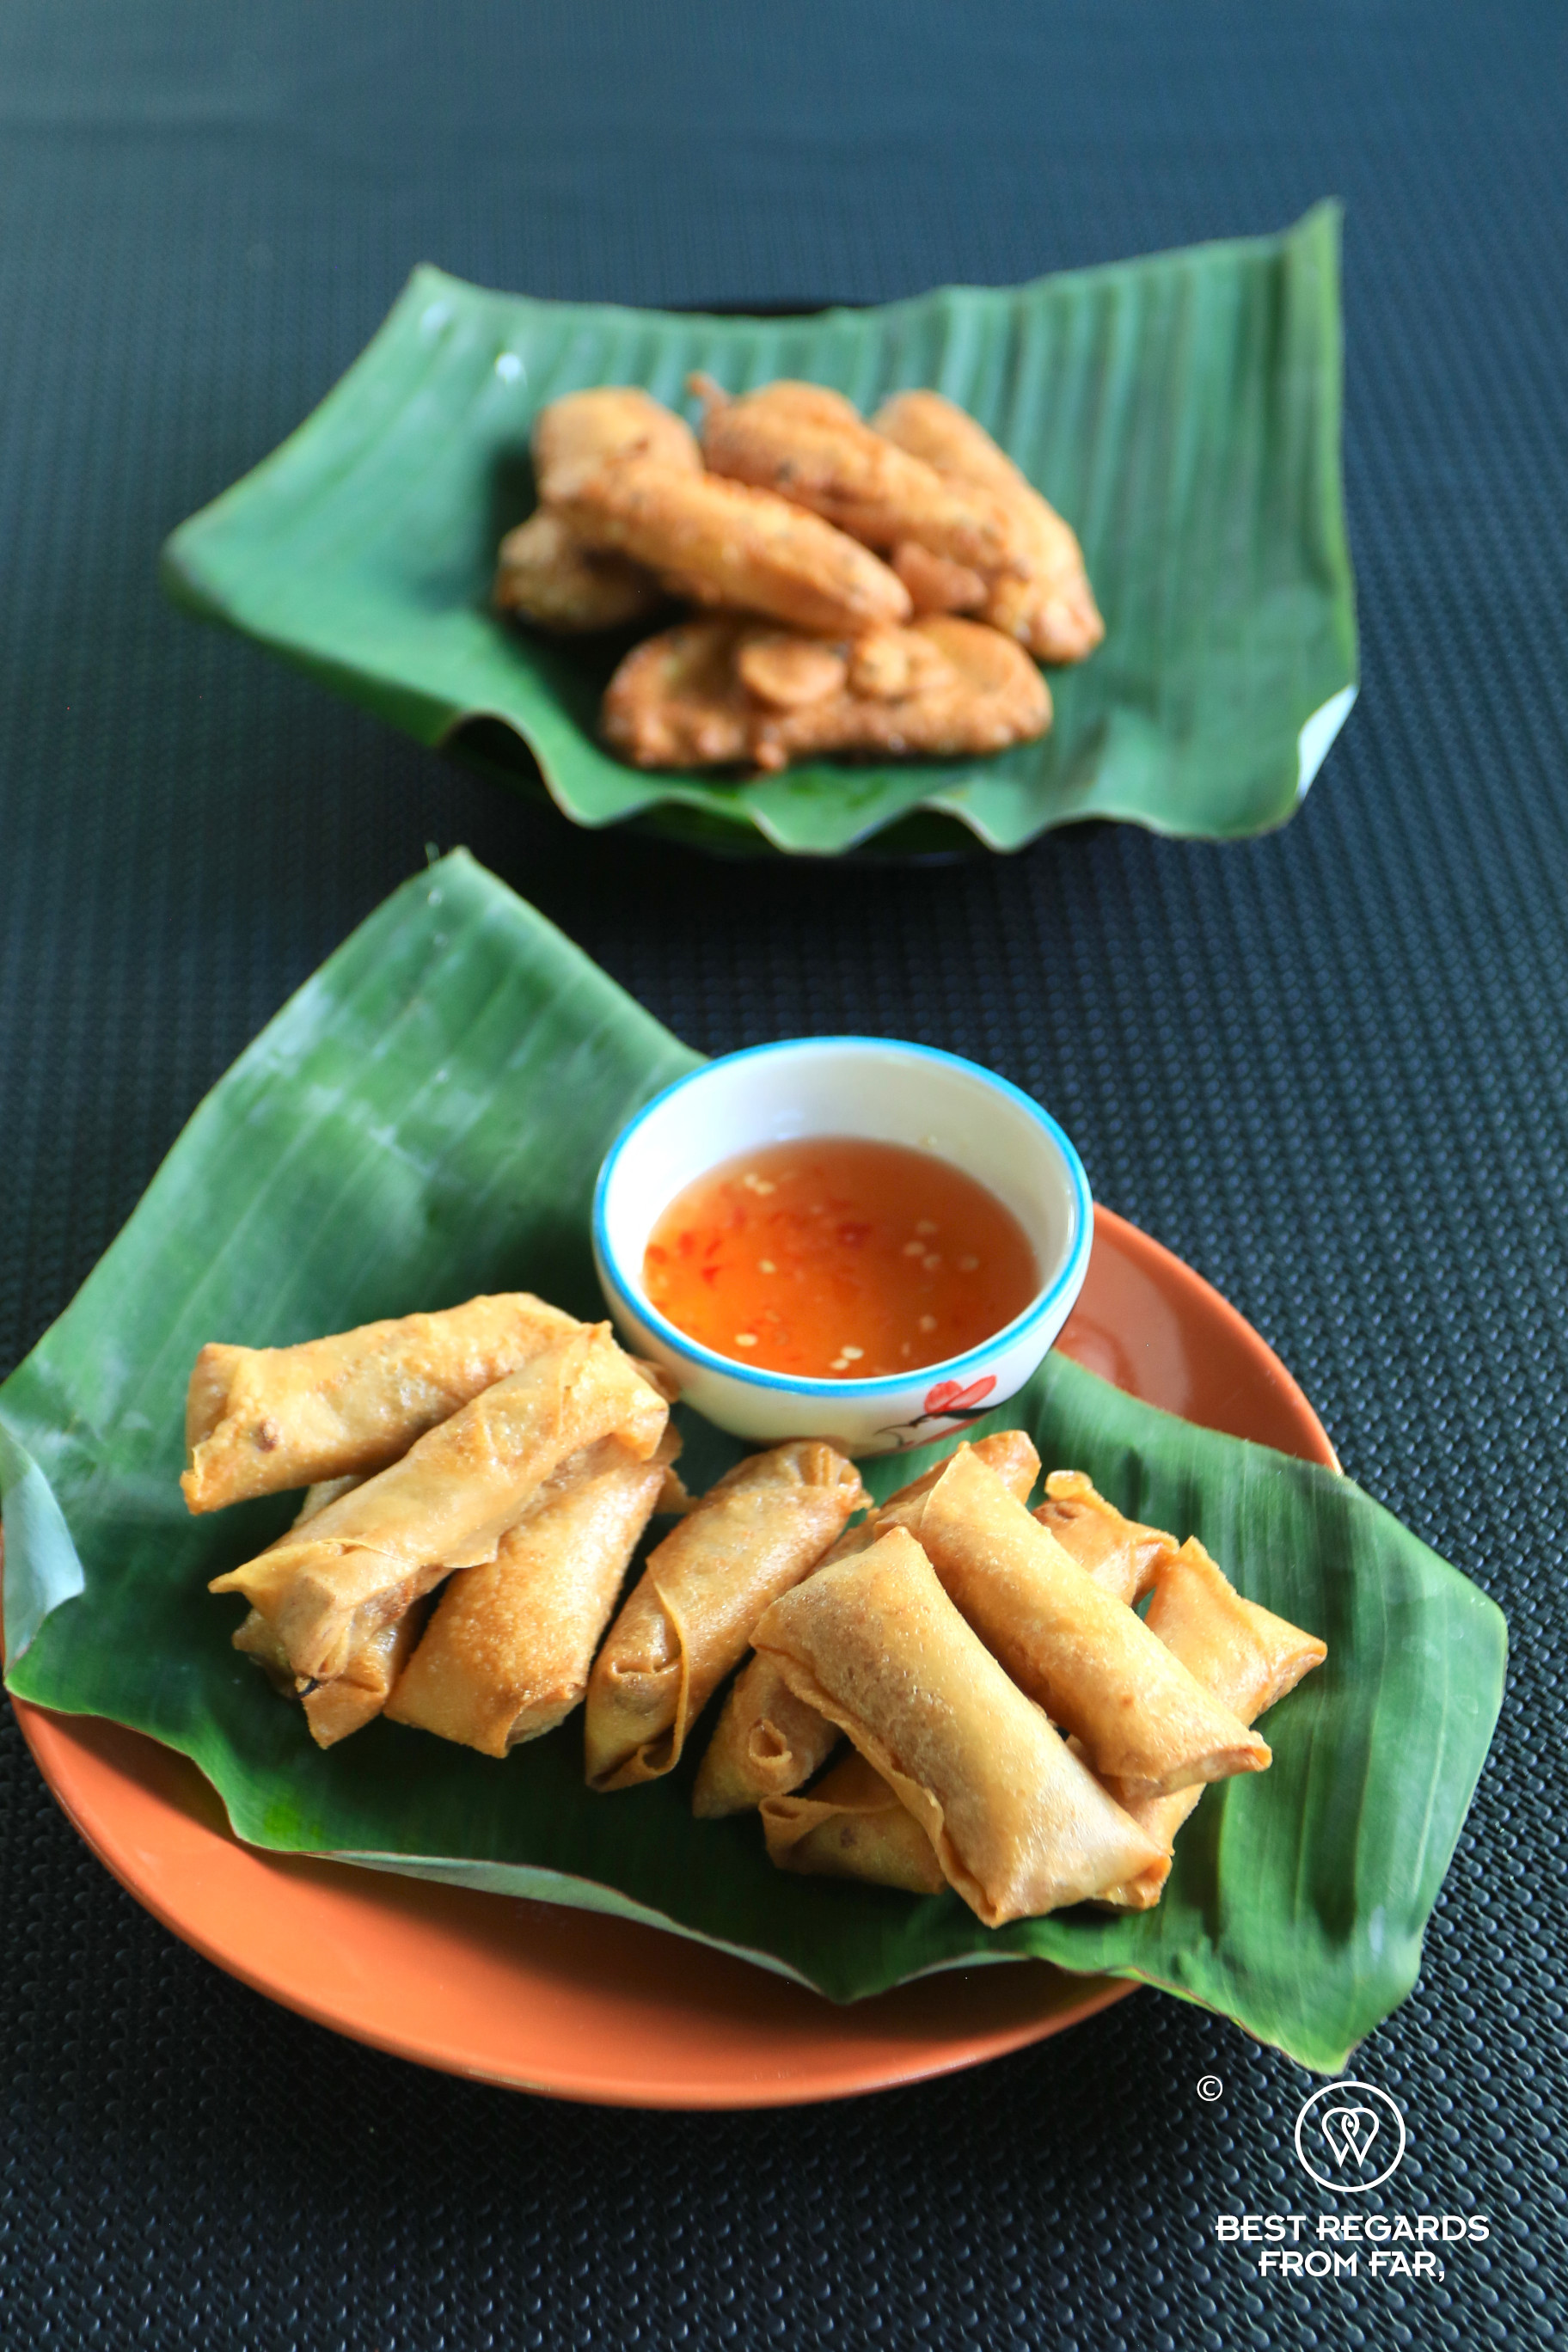 Fried spring rolls and fried bananas, Thai cooking class